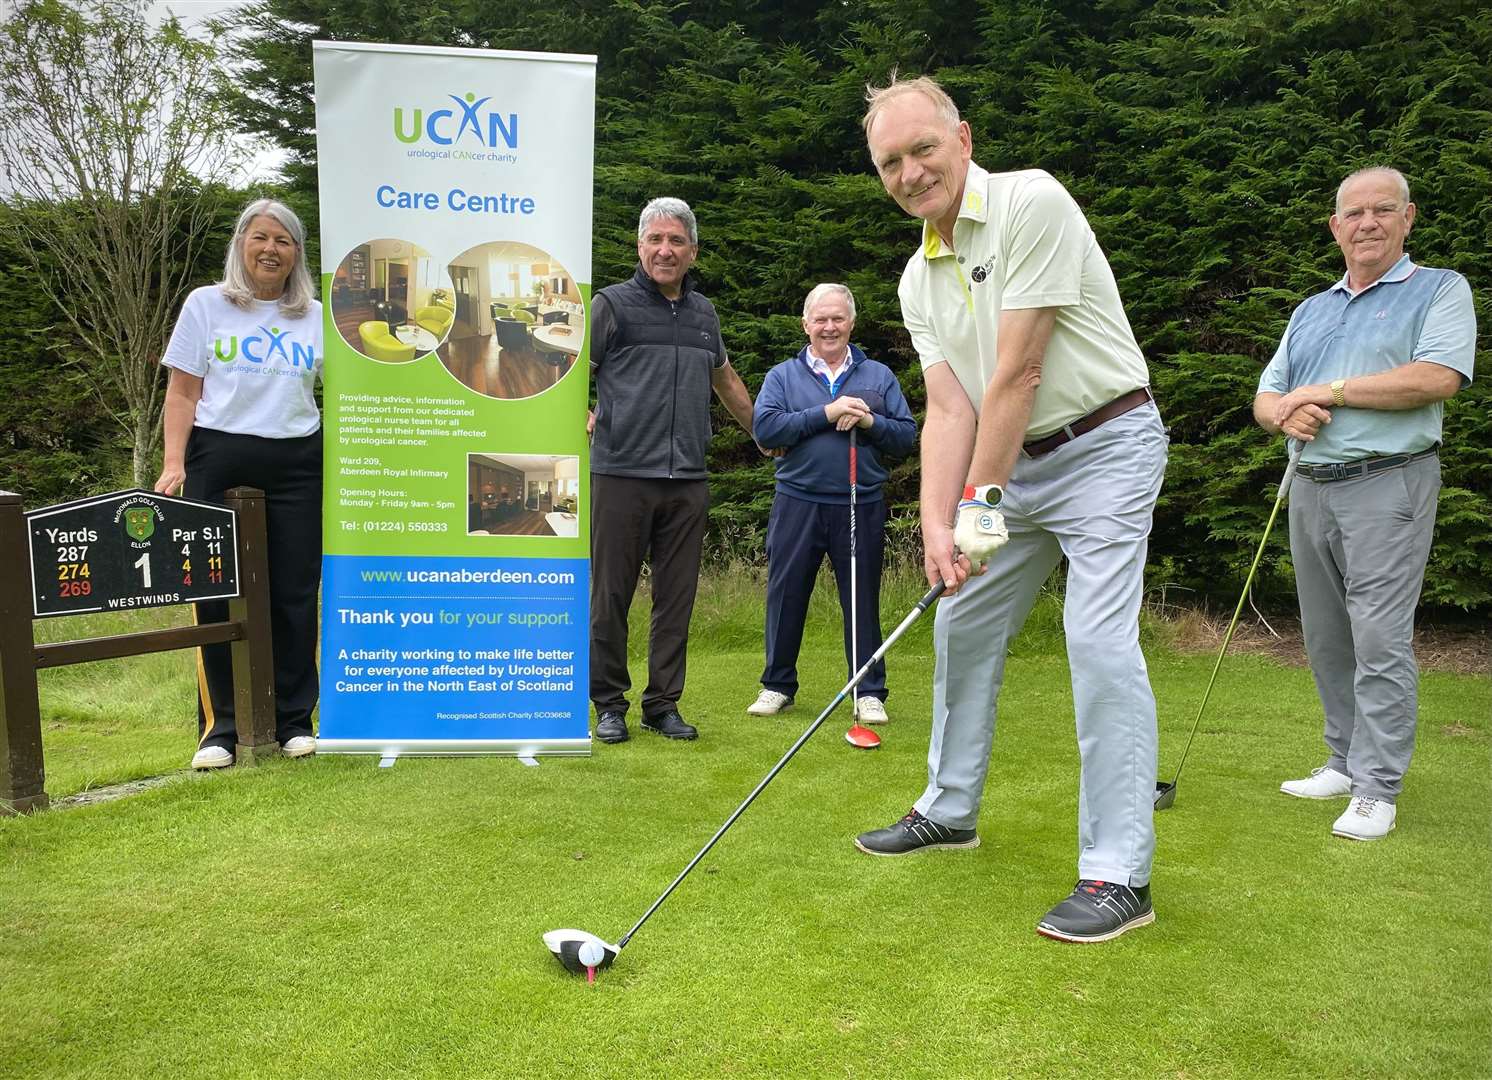 Jim Leighton gets ready to tee-off at the UCAN fundraiser held at Ellon Golf Club. Picture: Phil Harman